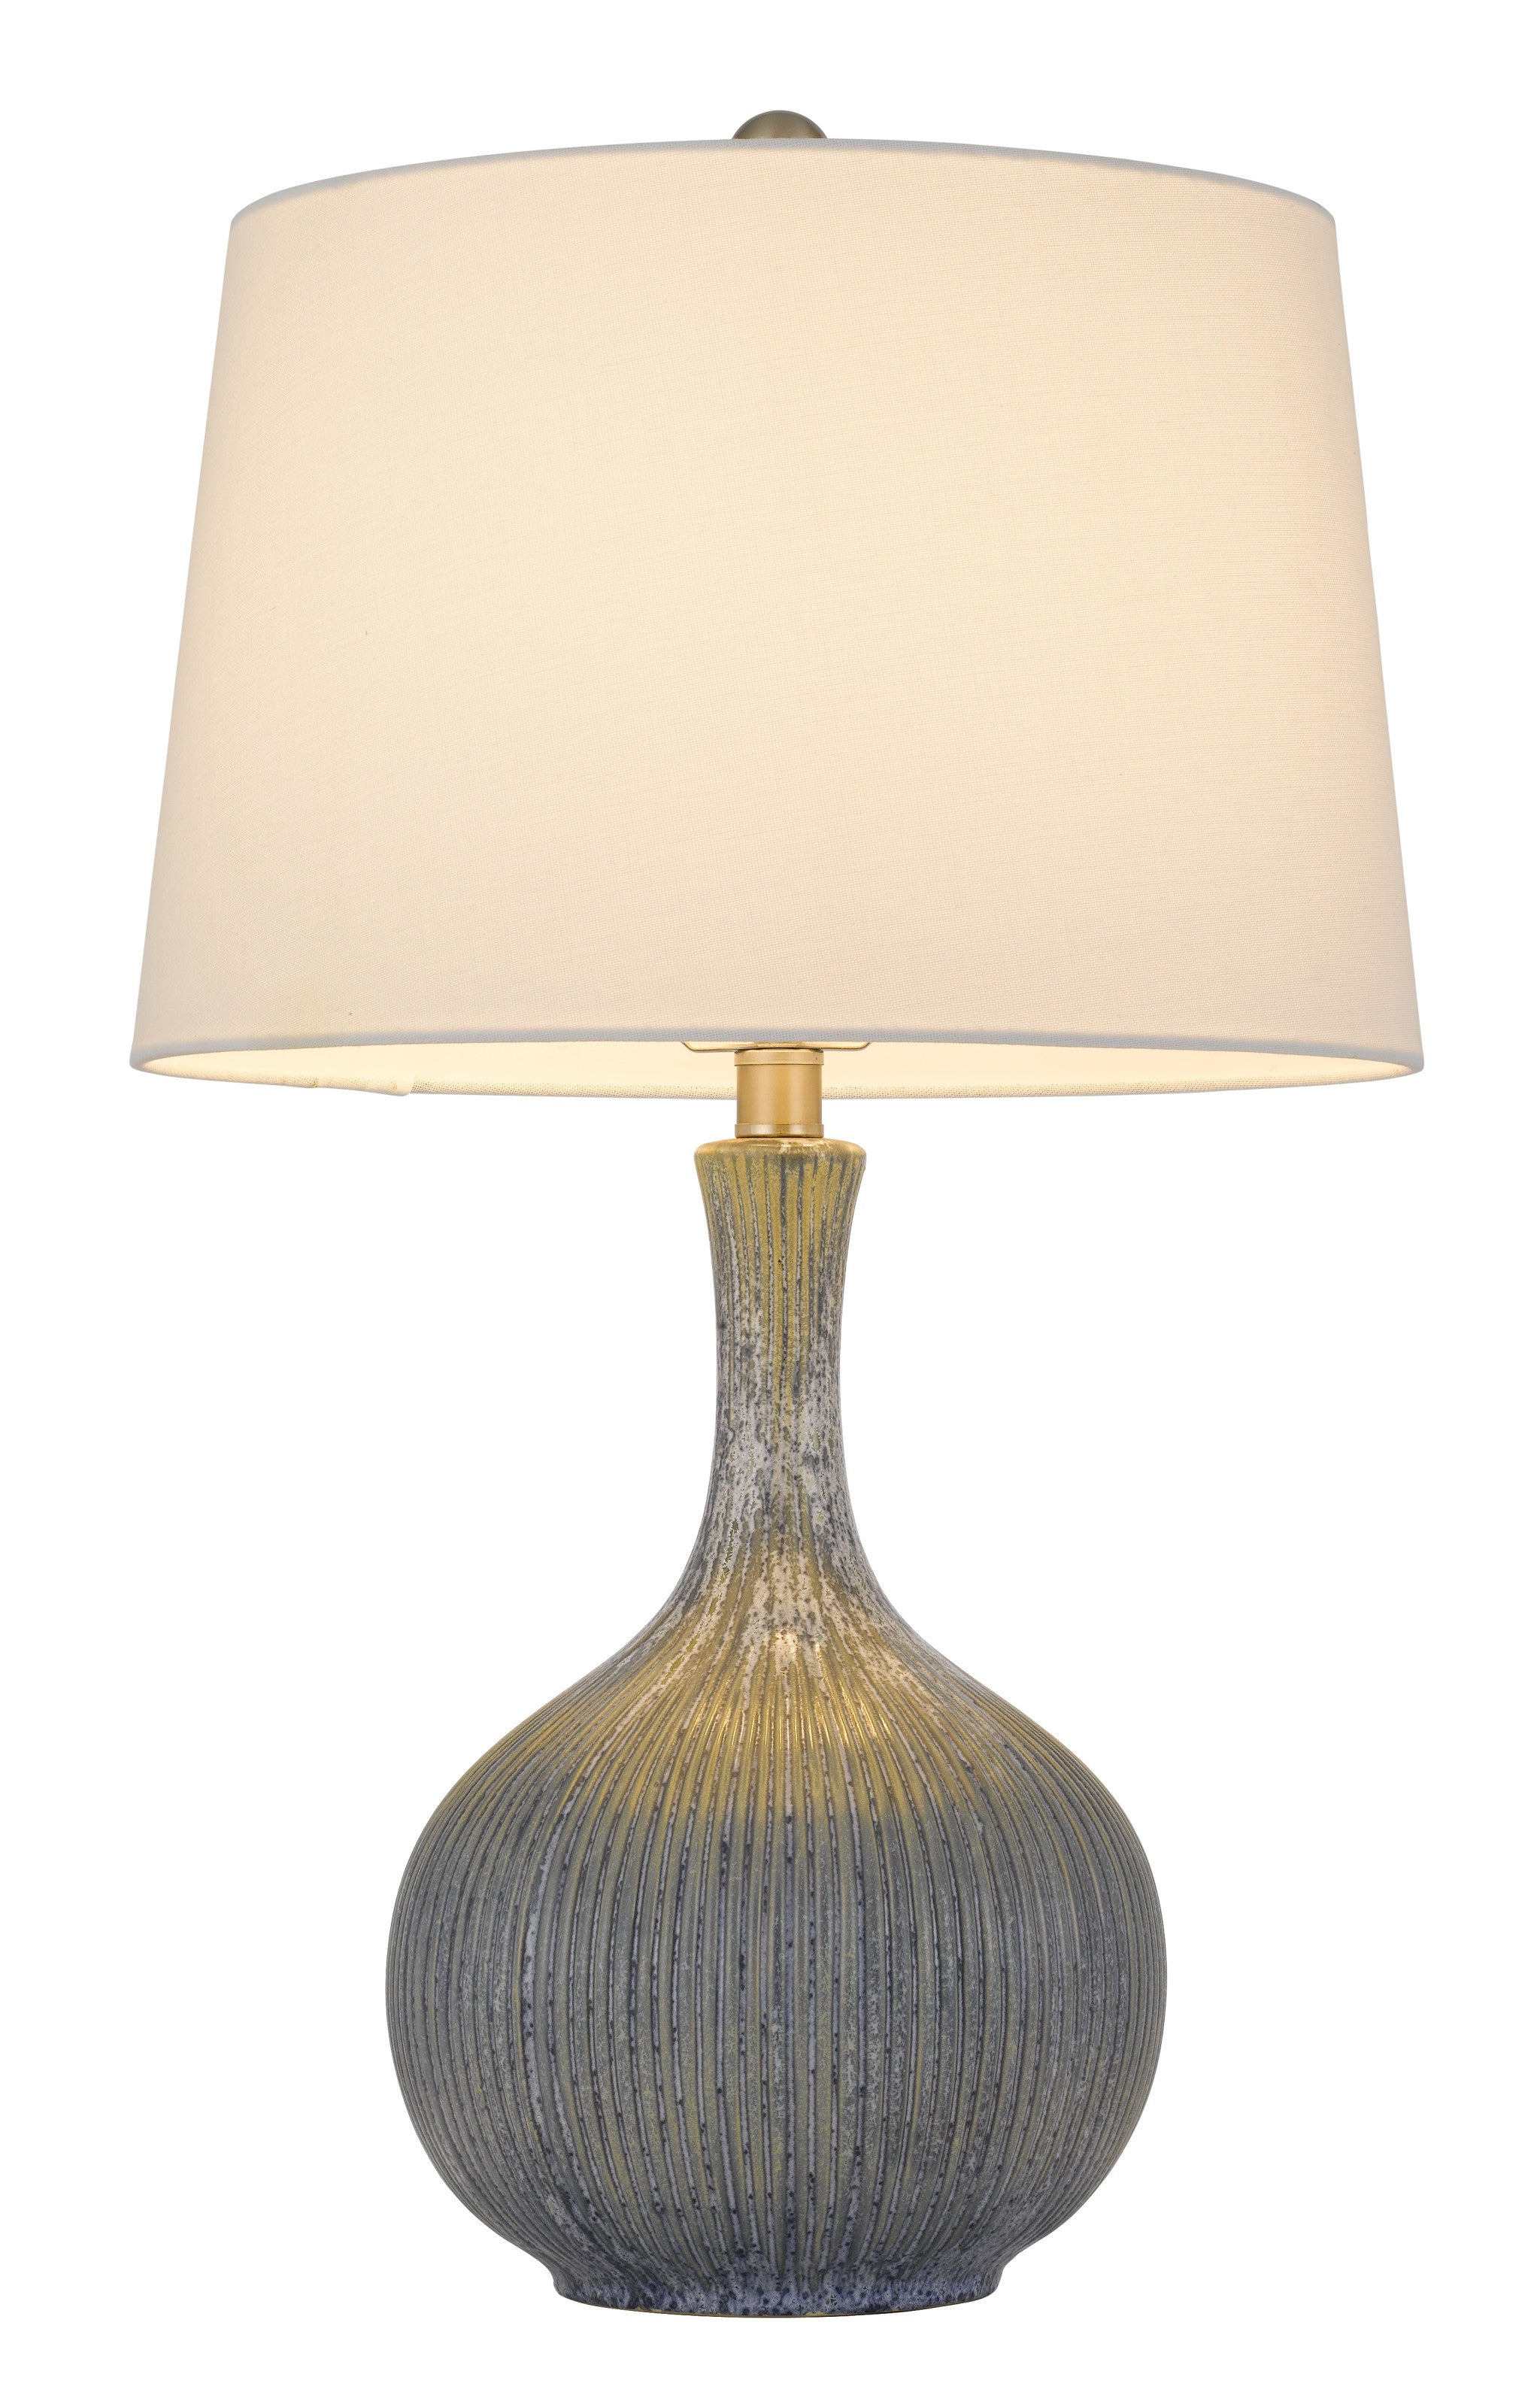 25" Stone Ceramic Table Lamp With White Empire Shade